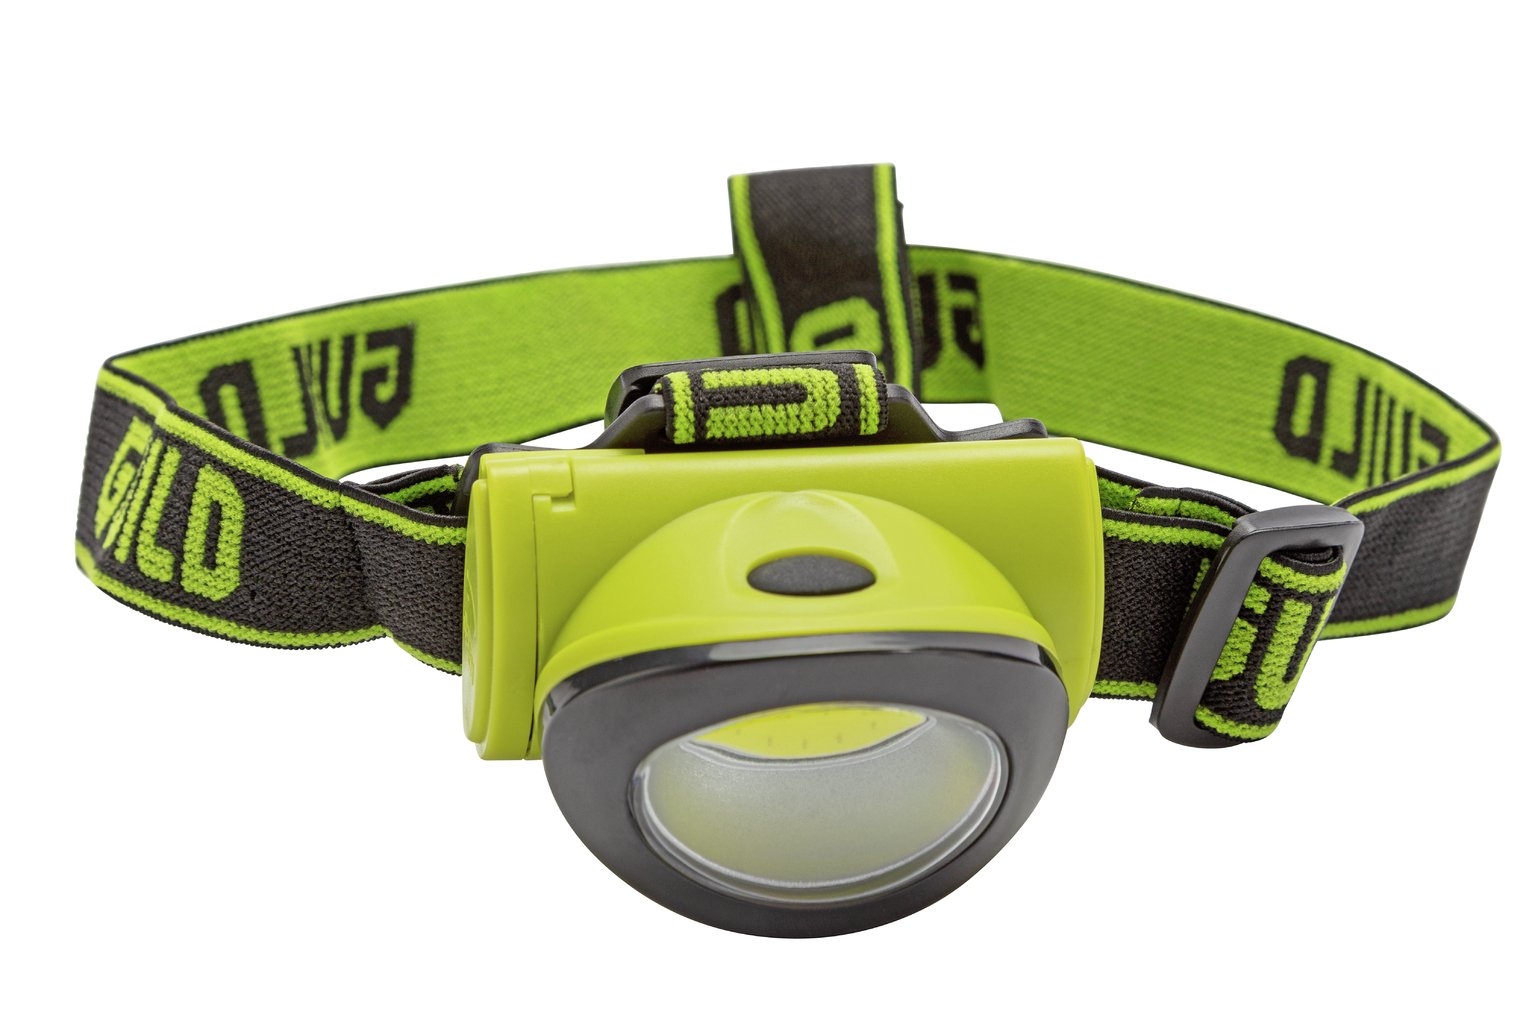 Guild 100 Lumen Head Lamp with Storage Bag Review